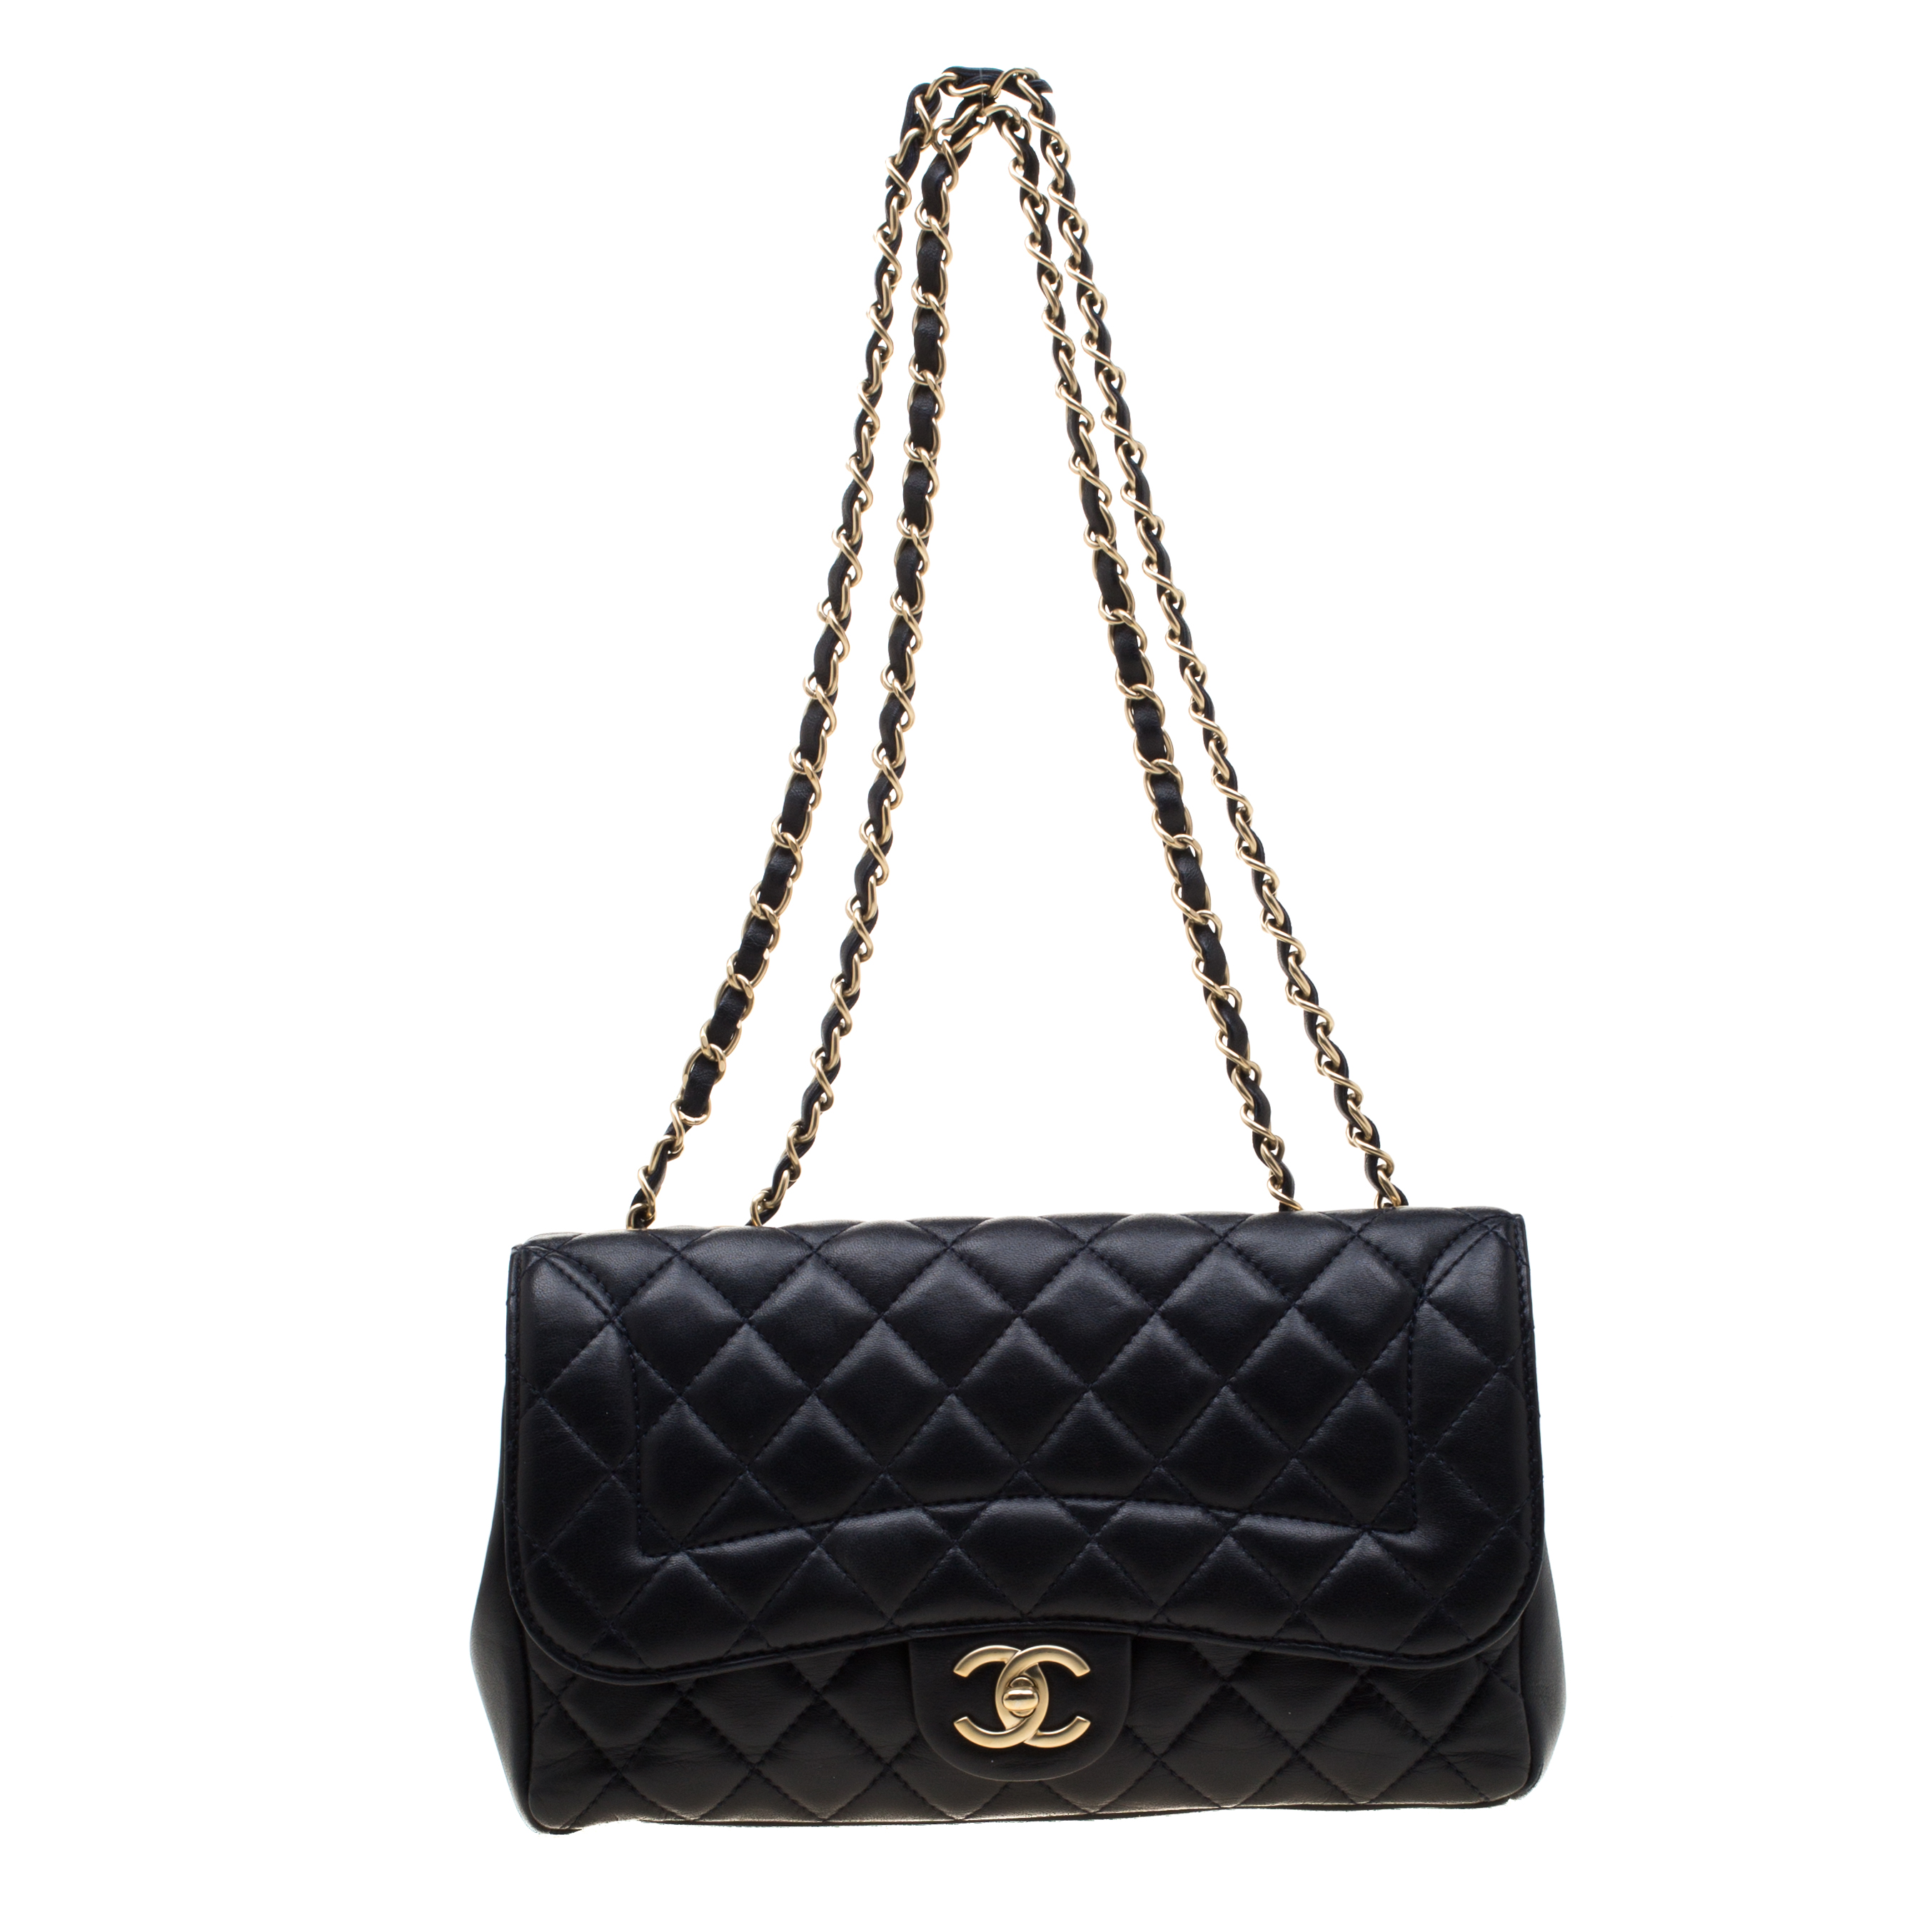 Chanel Navy Blue Quilted Leather Mademoiselle Chic Flap Shoulder Bag